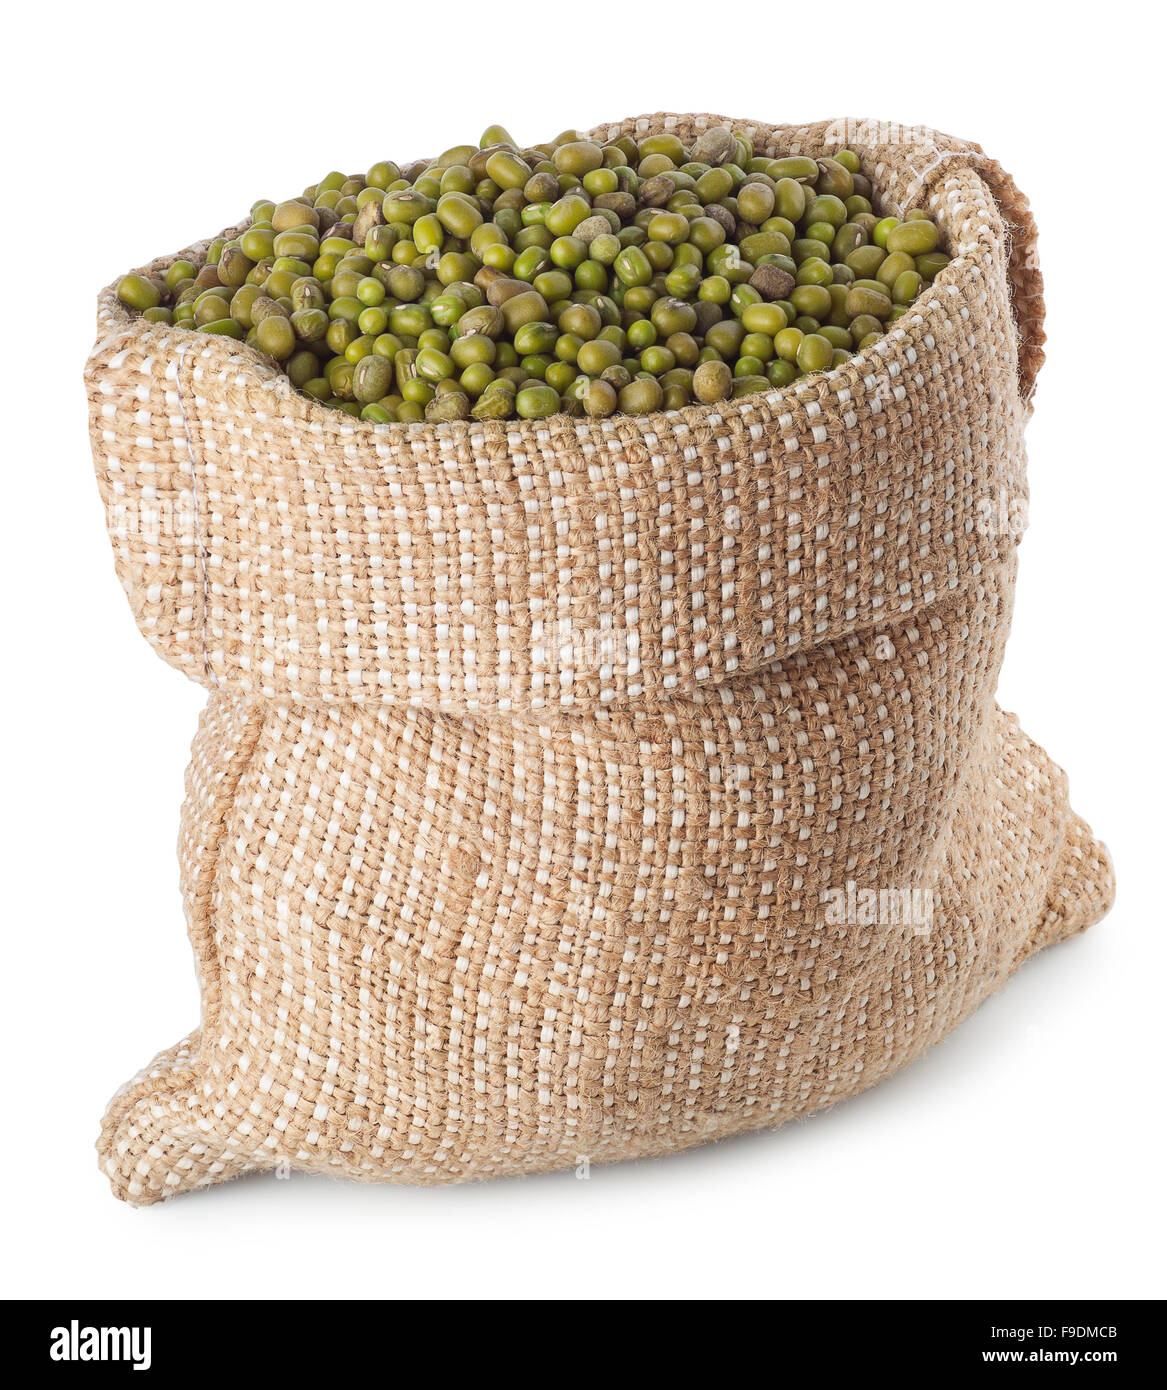 Mung beans in a sack isolated on white background Stock Photo